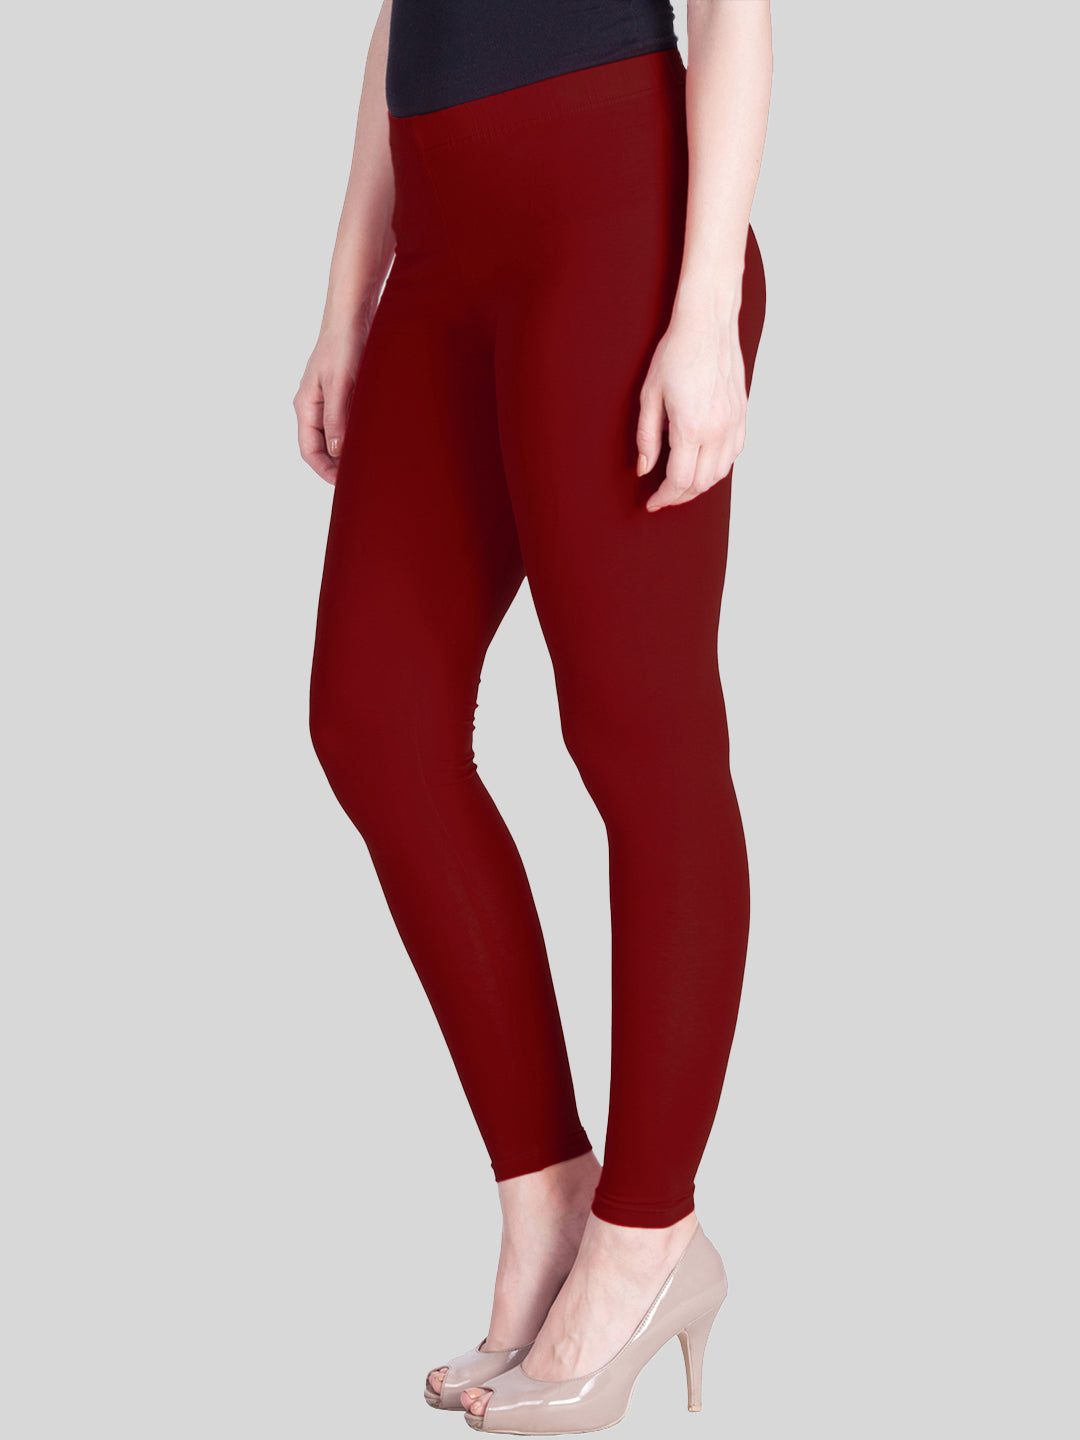 Women's Maroon Color (Pinkish Red) Ankle Length Stretch Legging – Trendsia